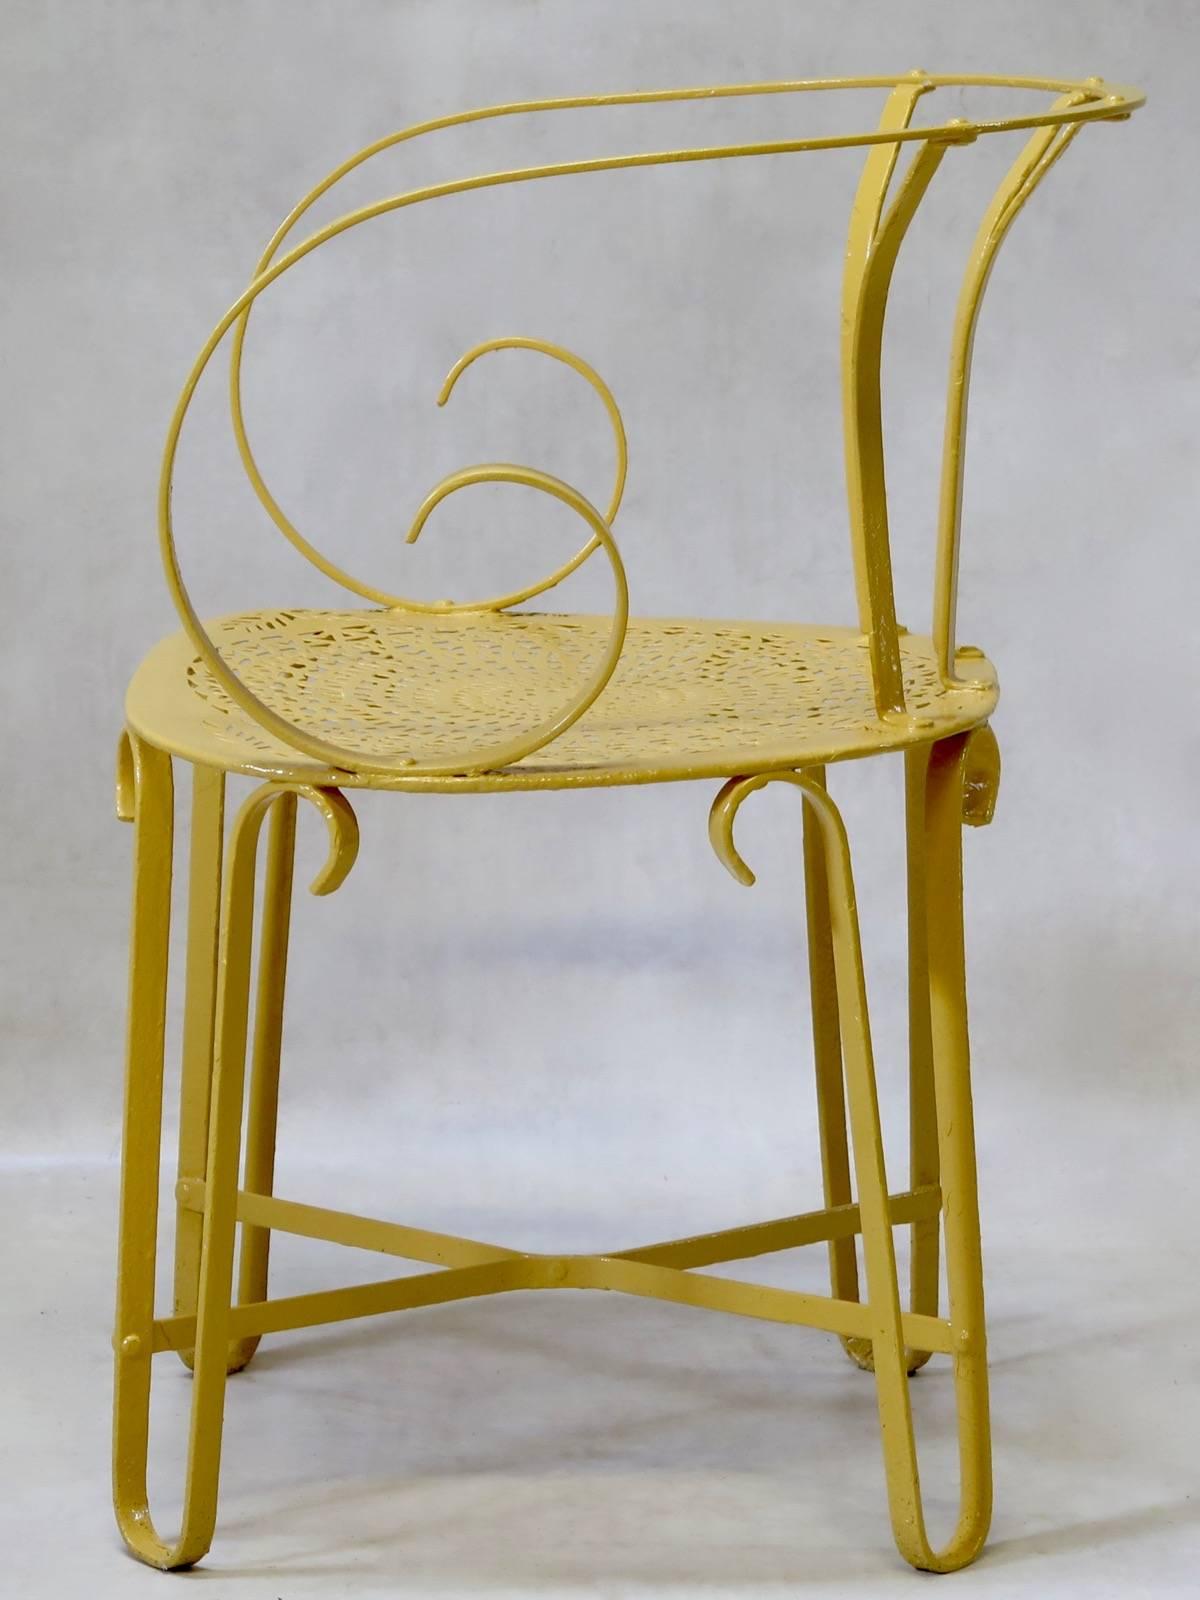 Painted Four French Wrought Iron Garden Chairs, circa 1910